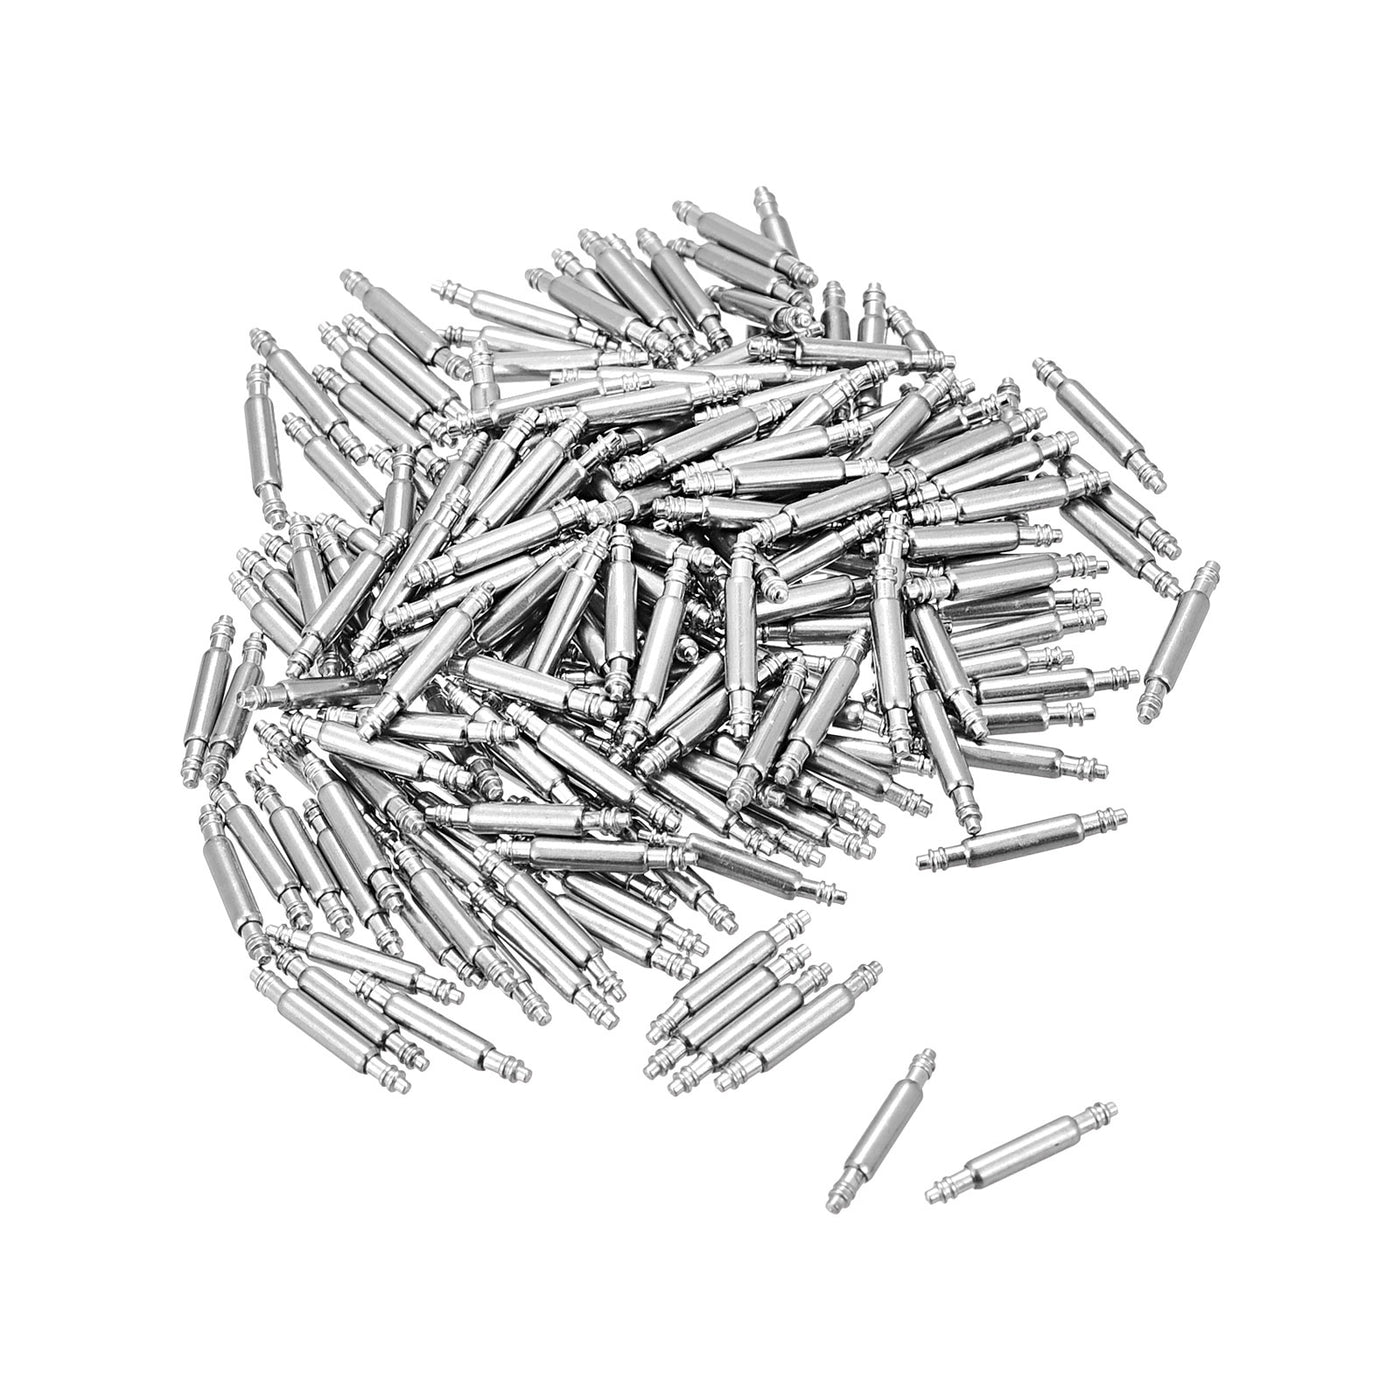 Uxcell Uxcell 200pcs Watch Band Link Pin 1.5mm Dia Spring Bar Pins for 9mm Watch Band Strap